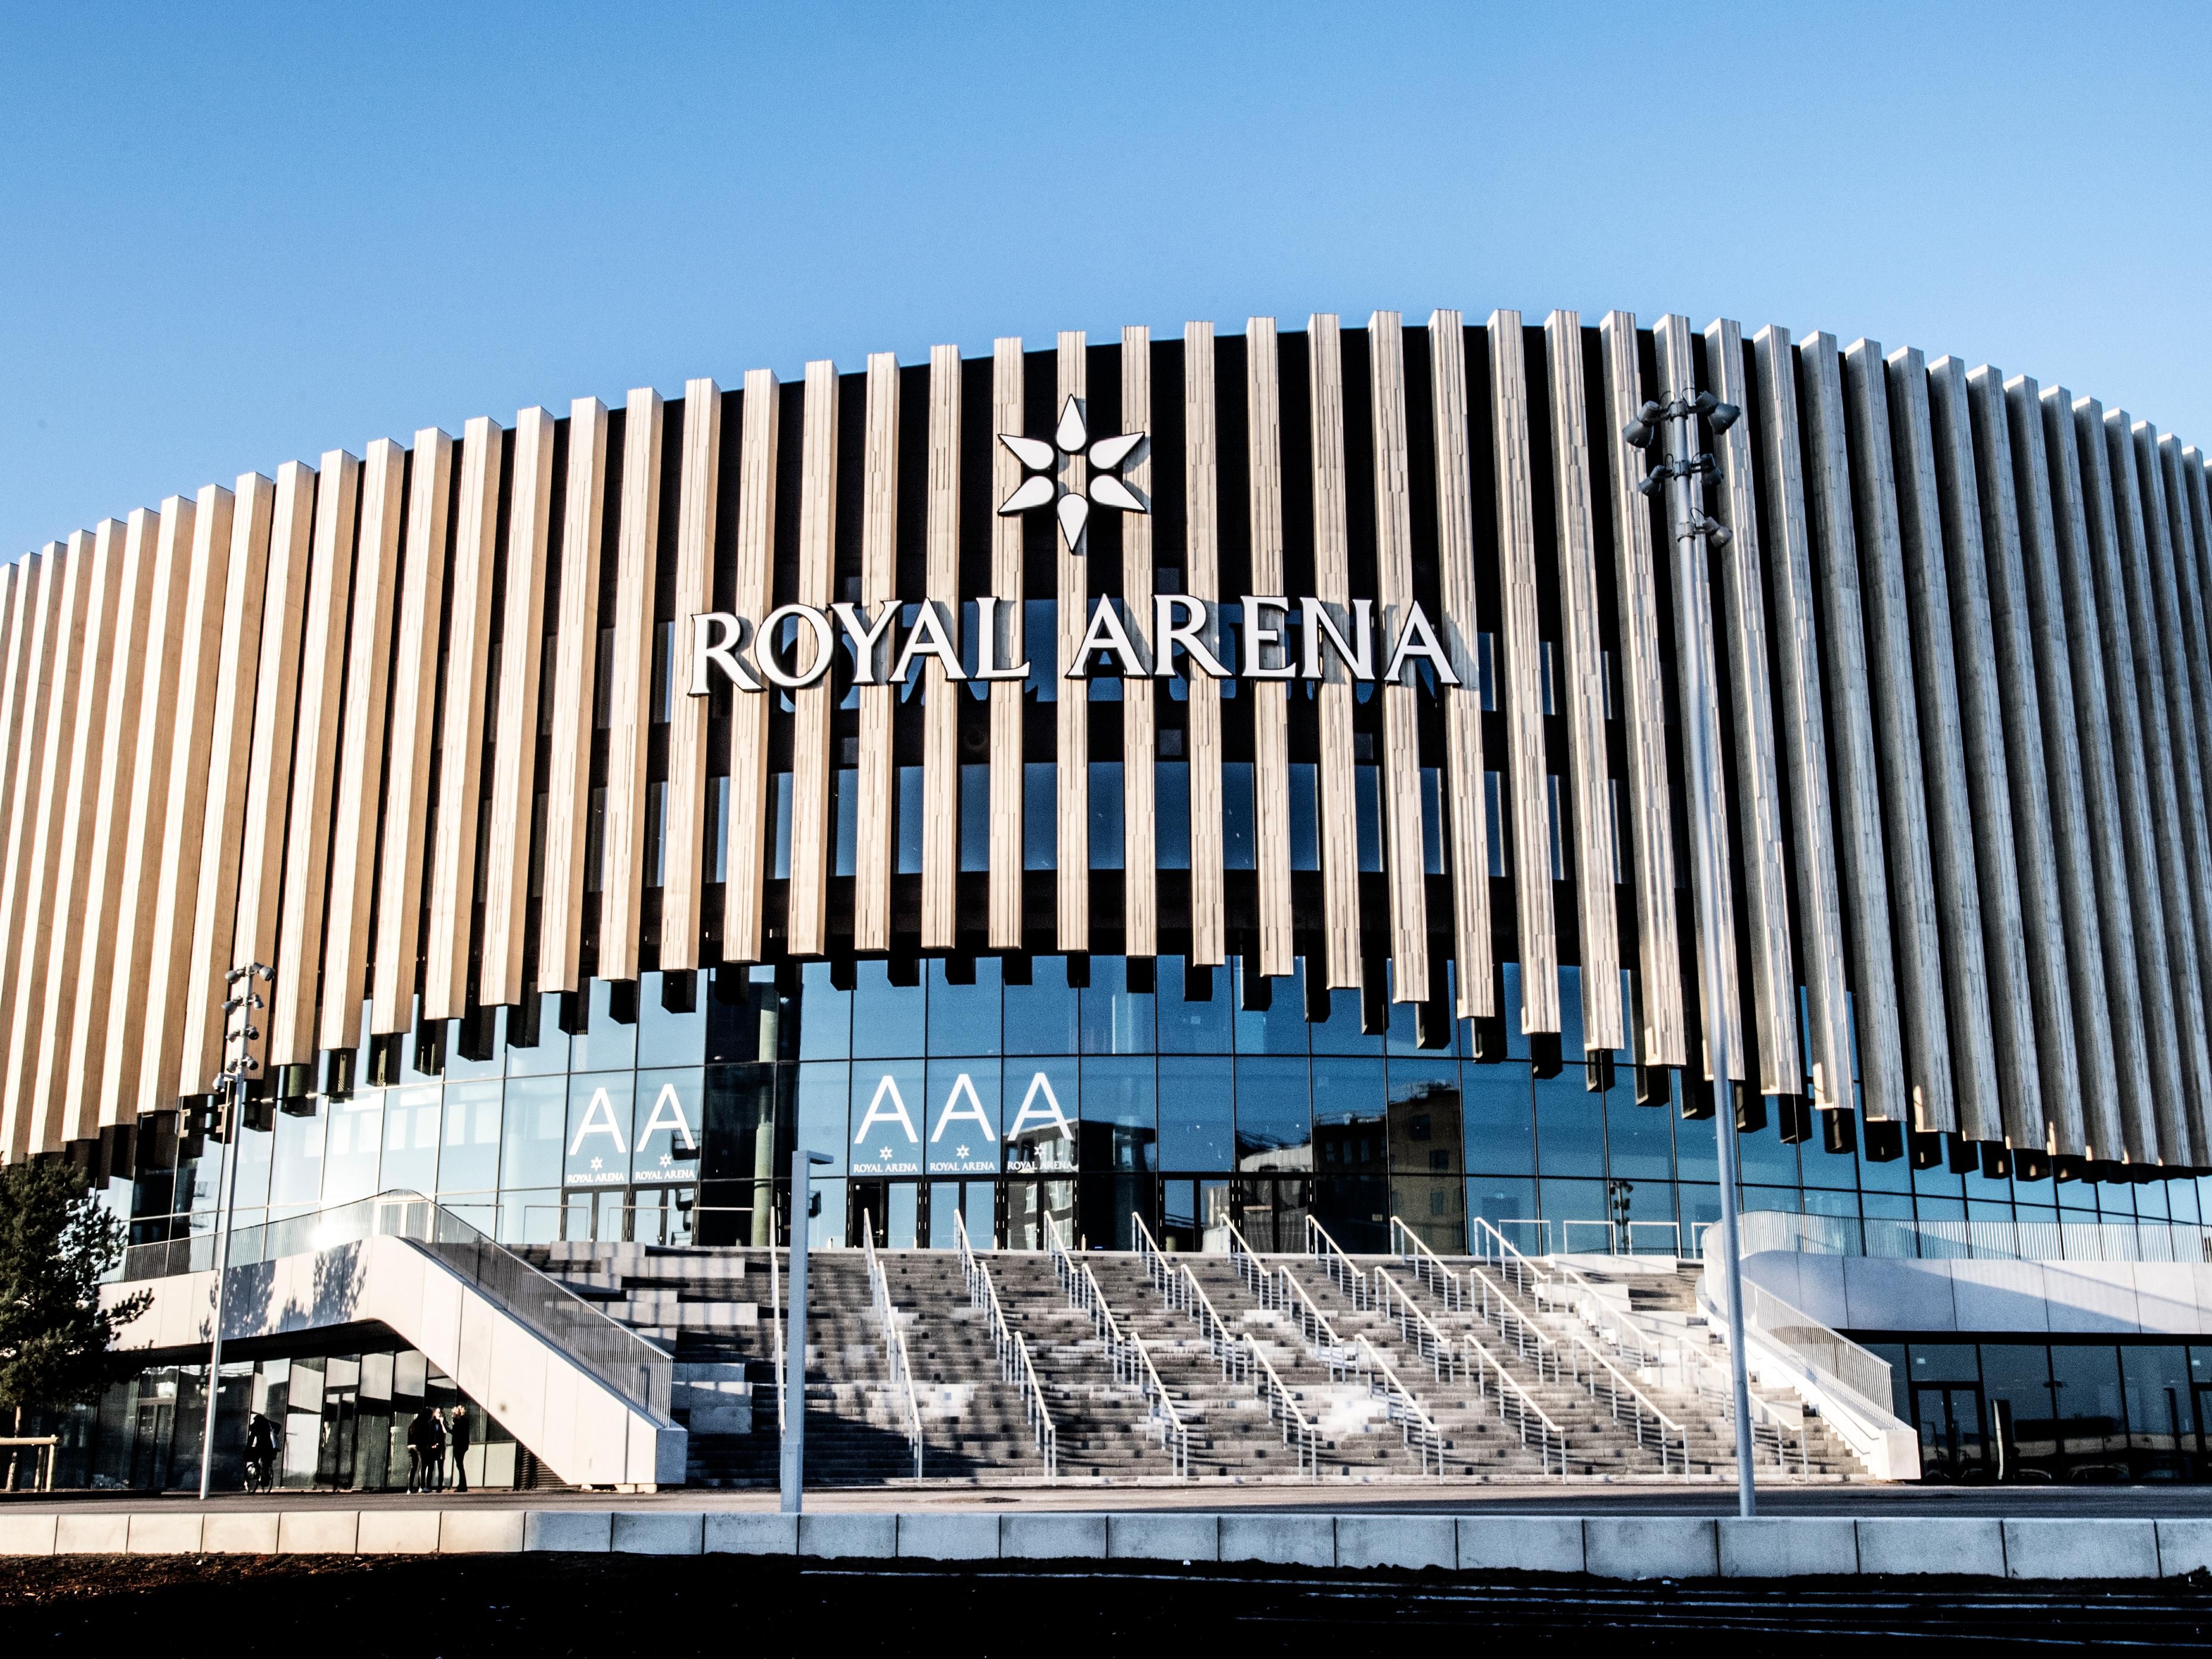 Royal Arena is Copenhagen's new multi-purpose and concert venue, located directly next to Crowne Plaza Copenhagen Towers. So, if you are going to one of the many concerts or other events in Copenhagen, Crowne Plaza Copenhagen Towers is the place to stay.
 
